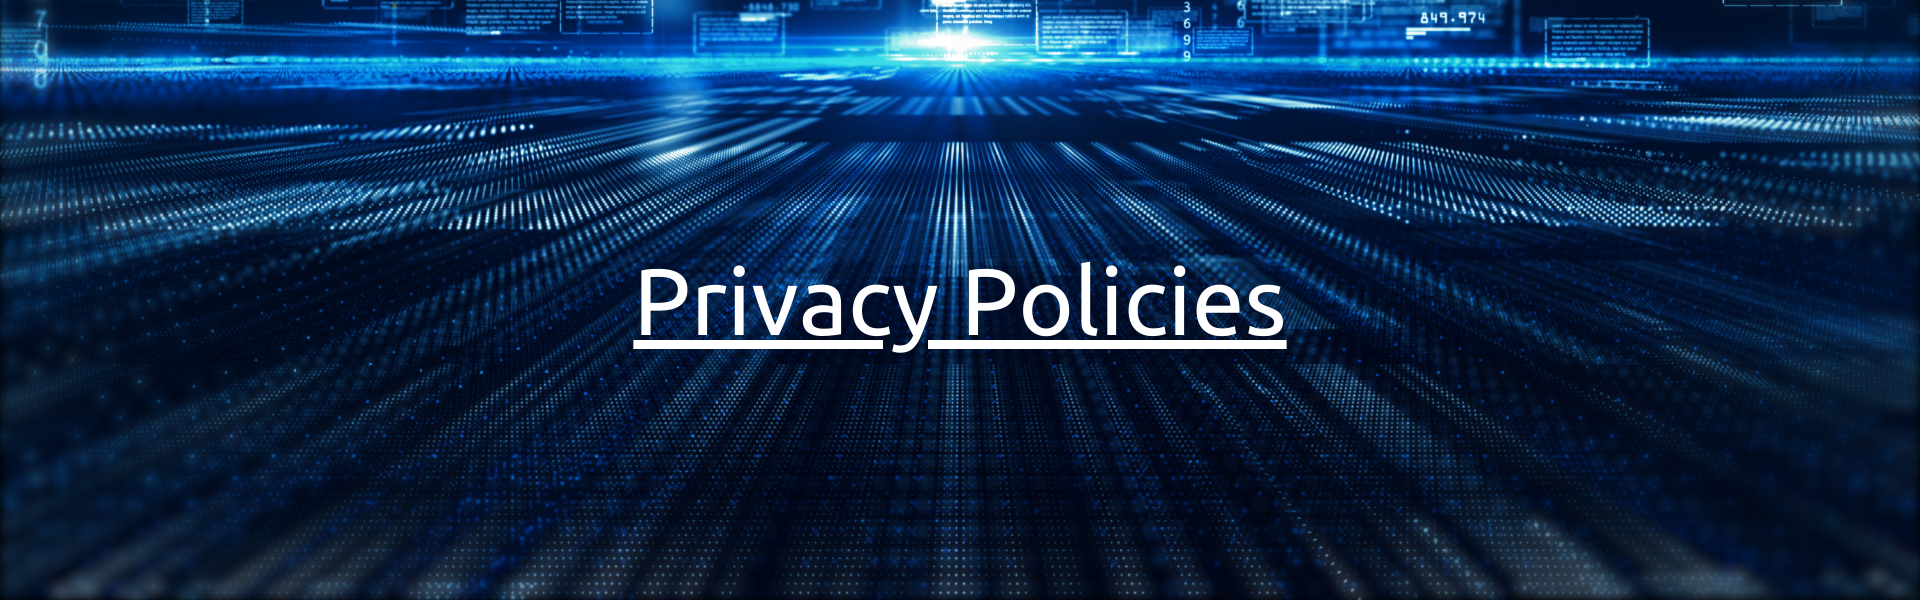 privacy policy banner hd